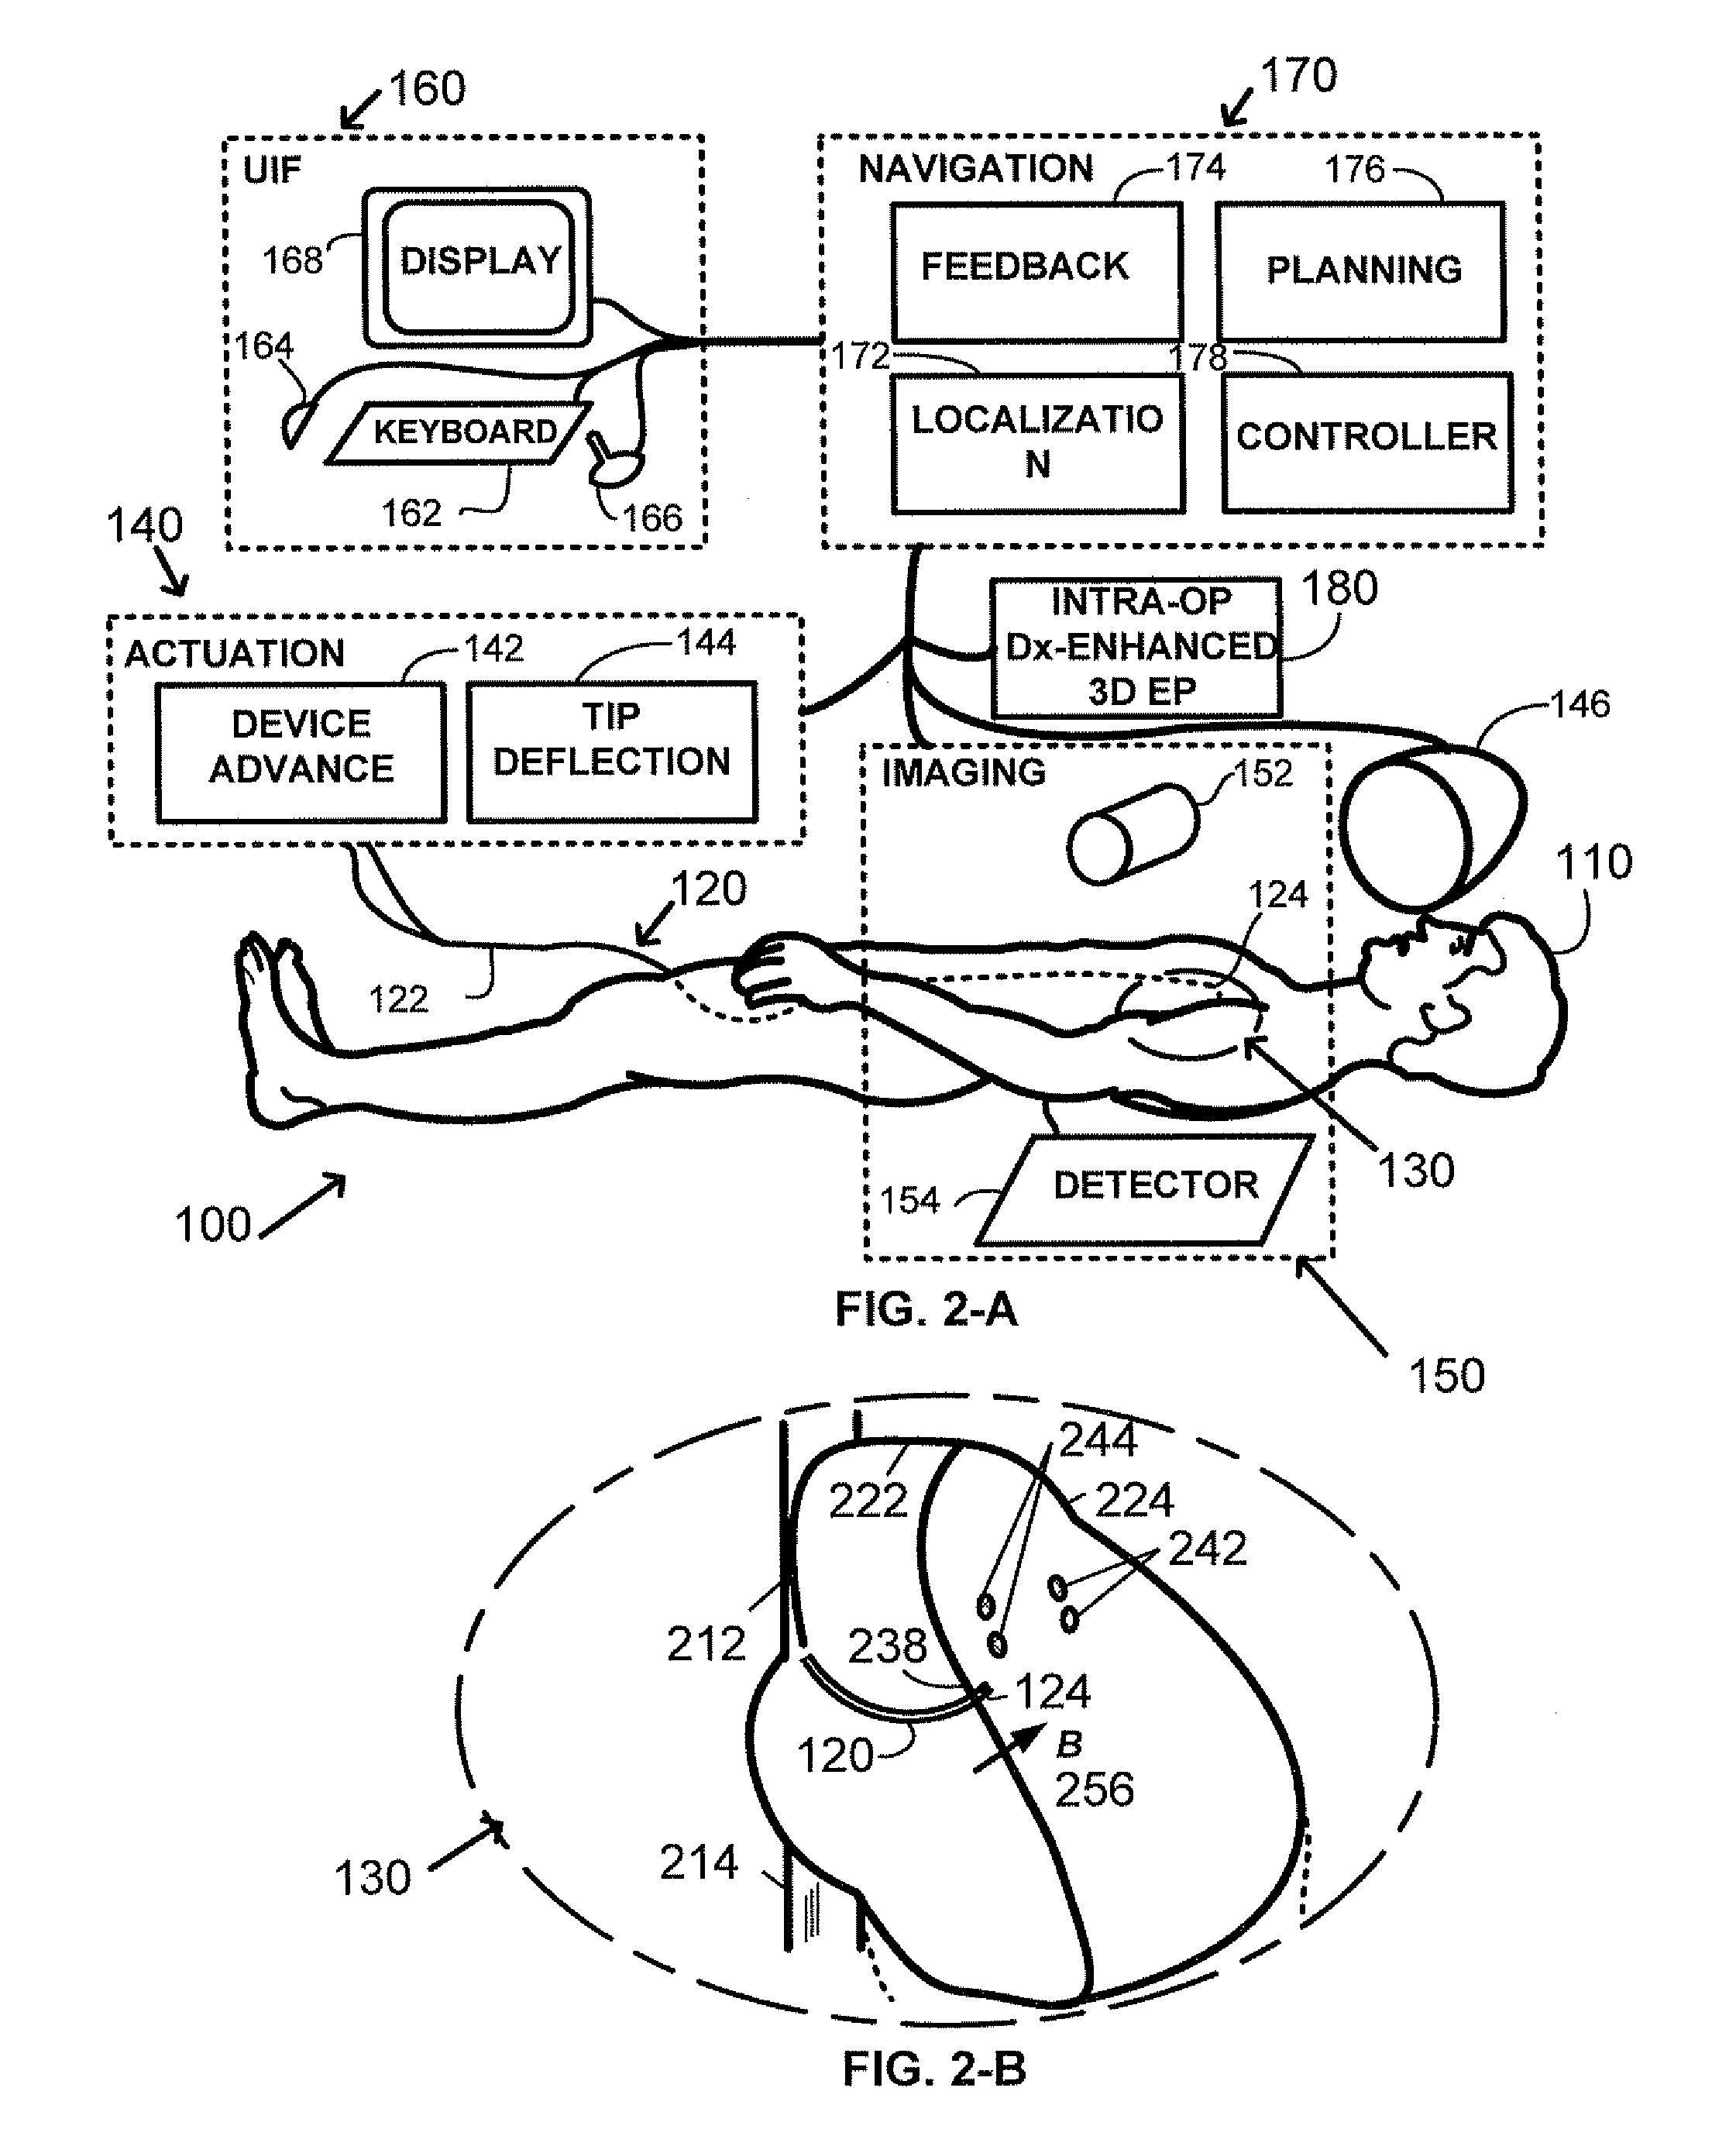 Method and apparatus for remotely controlled navigation using diagnostically enhanced intra-operative three-dimensional image data